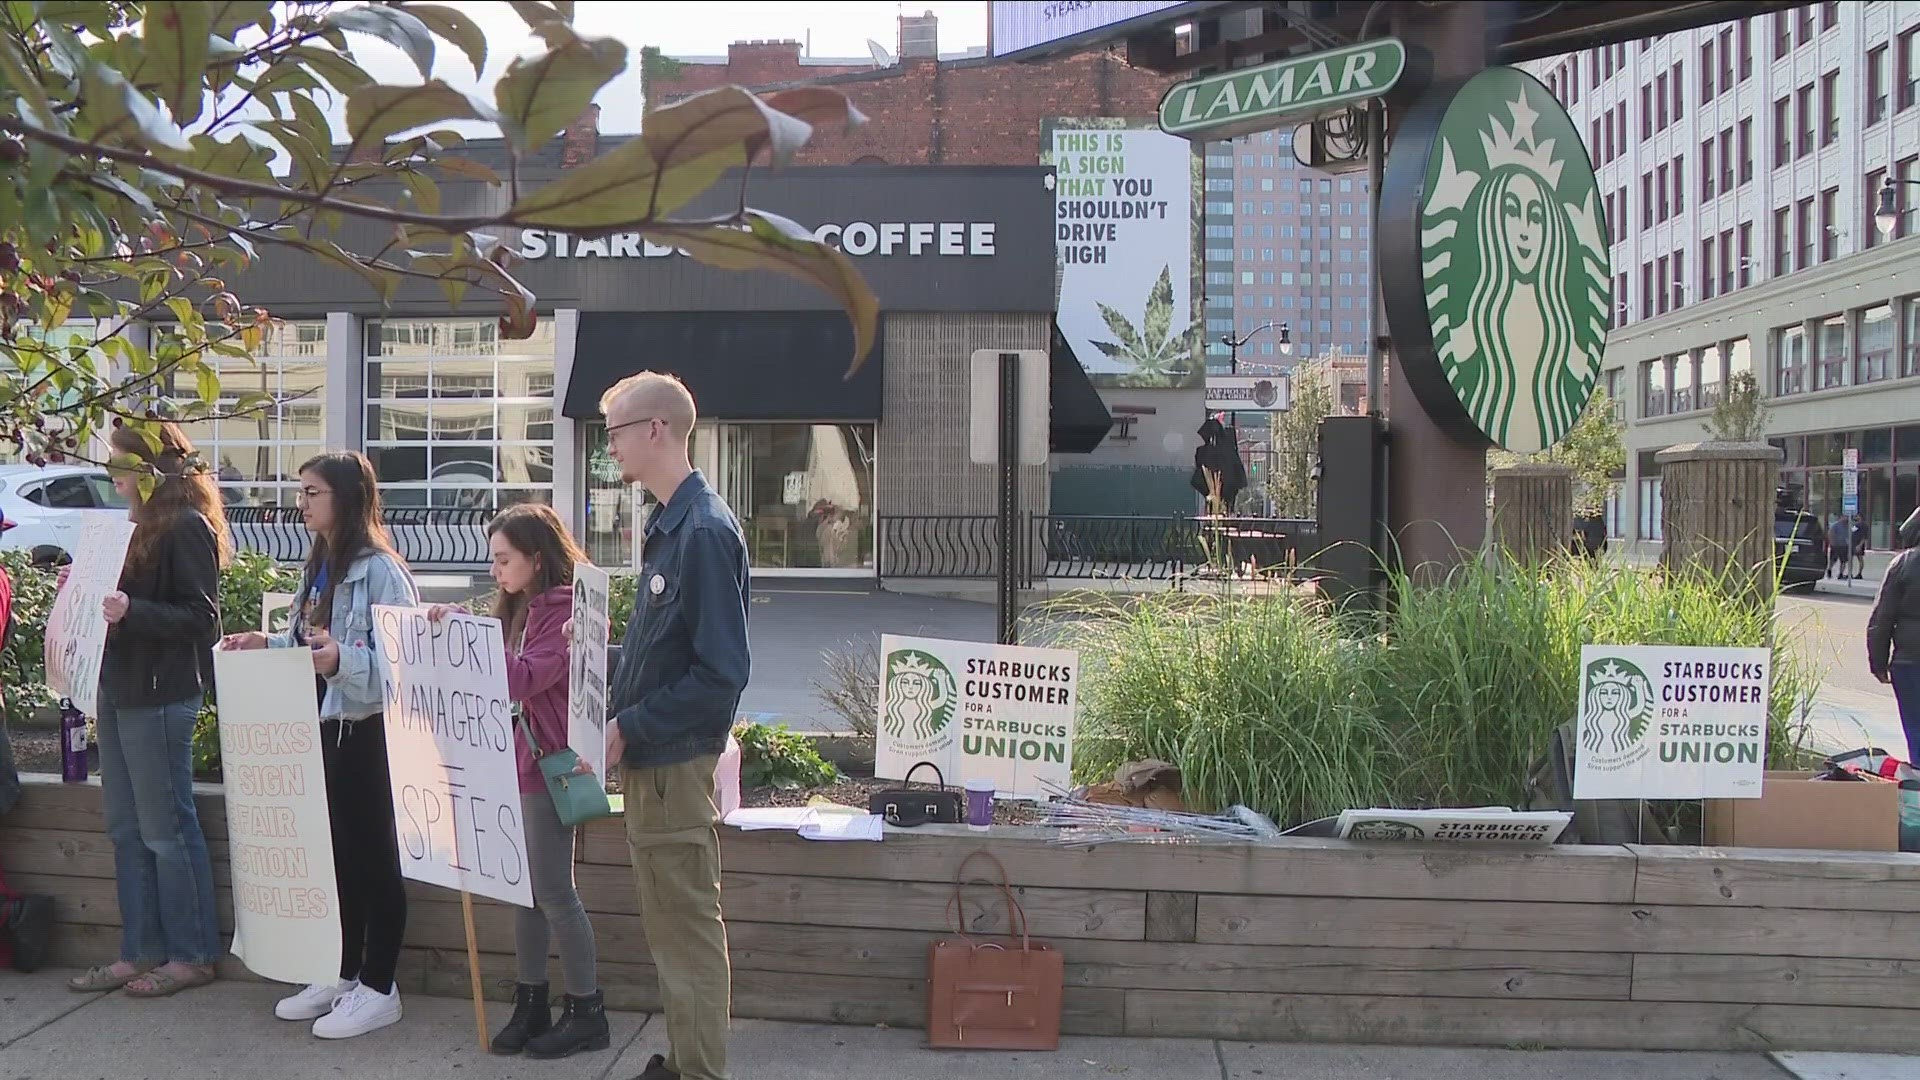 Employees at the Starbucks located at the corner of Delaware and Chippewa have filed a petition to dissolve the union